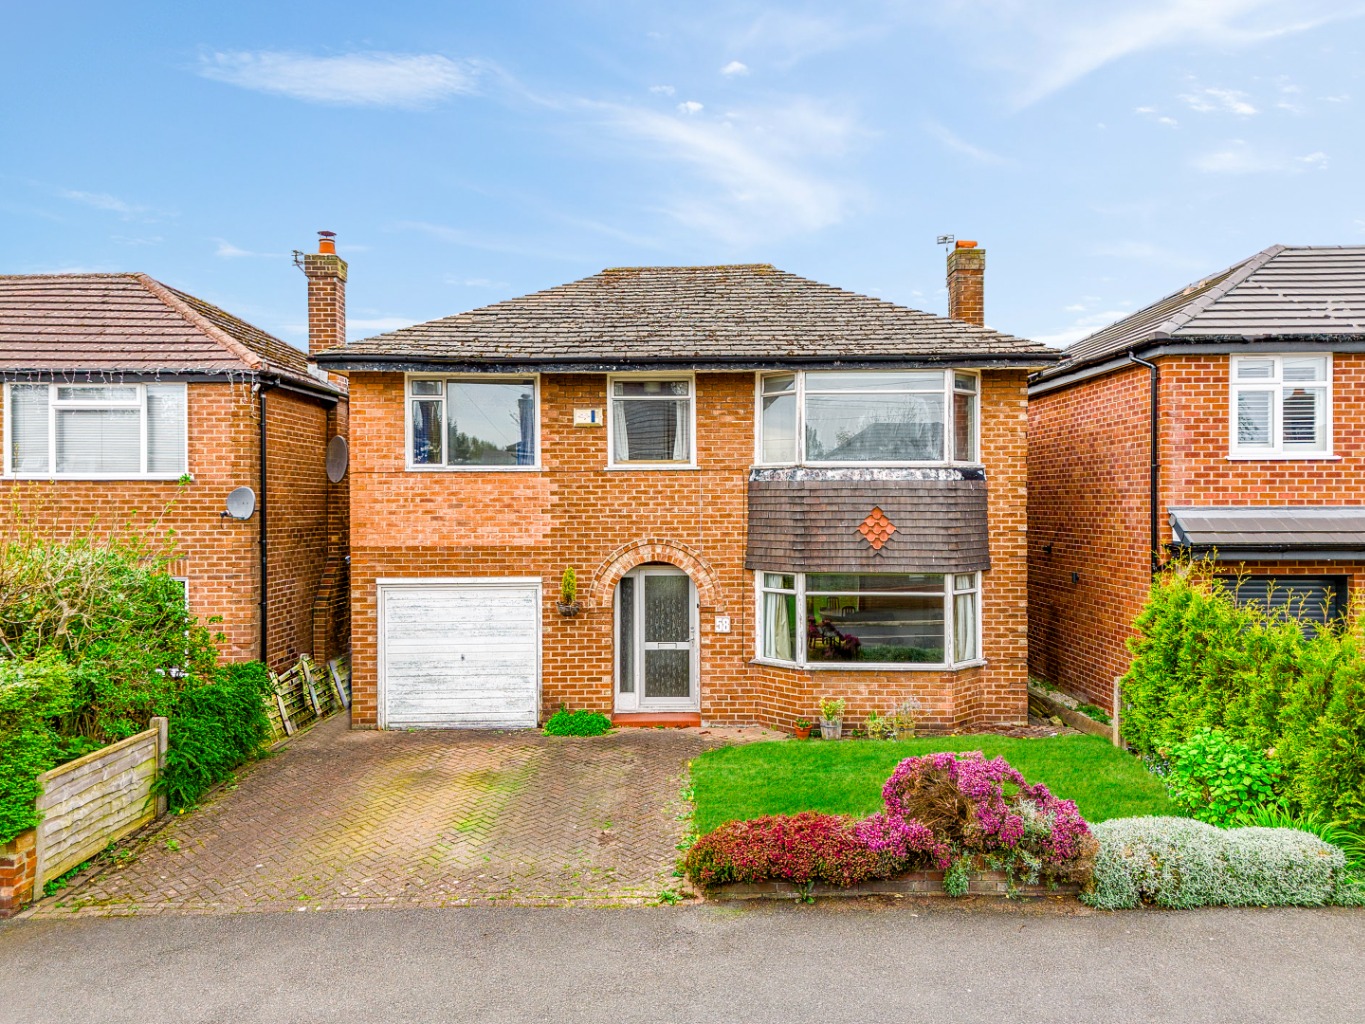 Images for Vicarage Avenue, Cheadle Hulme, Cheadle, Cheshire, SK8 7JP